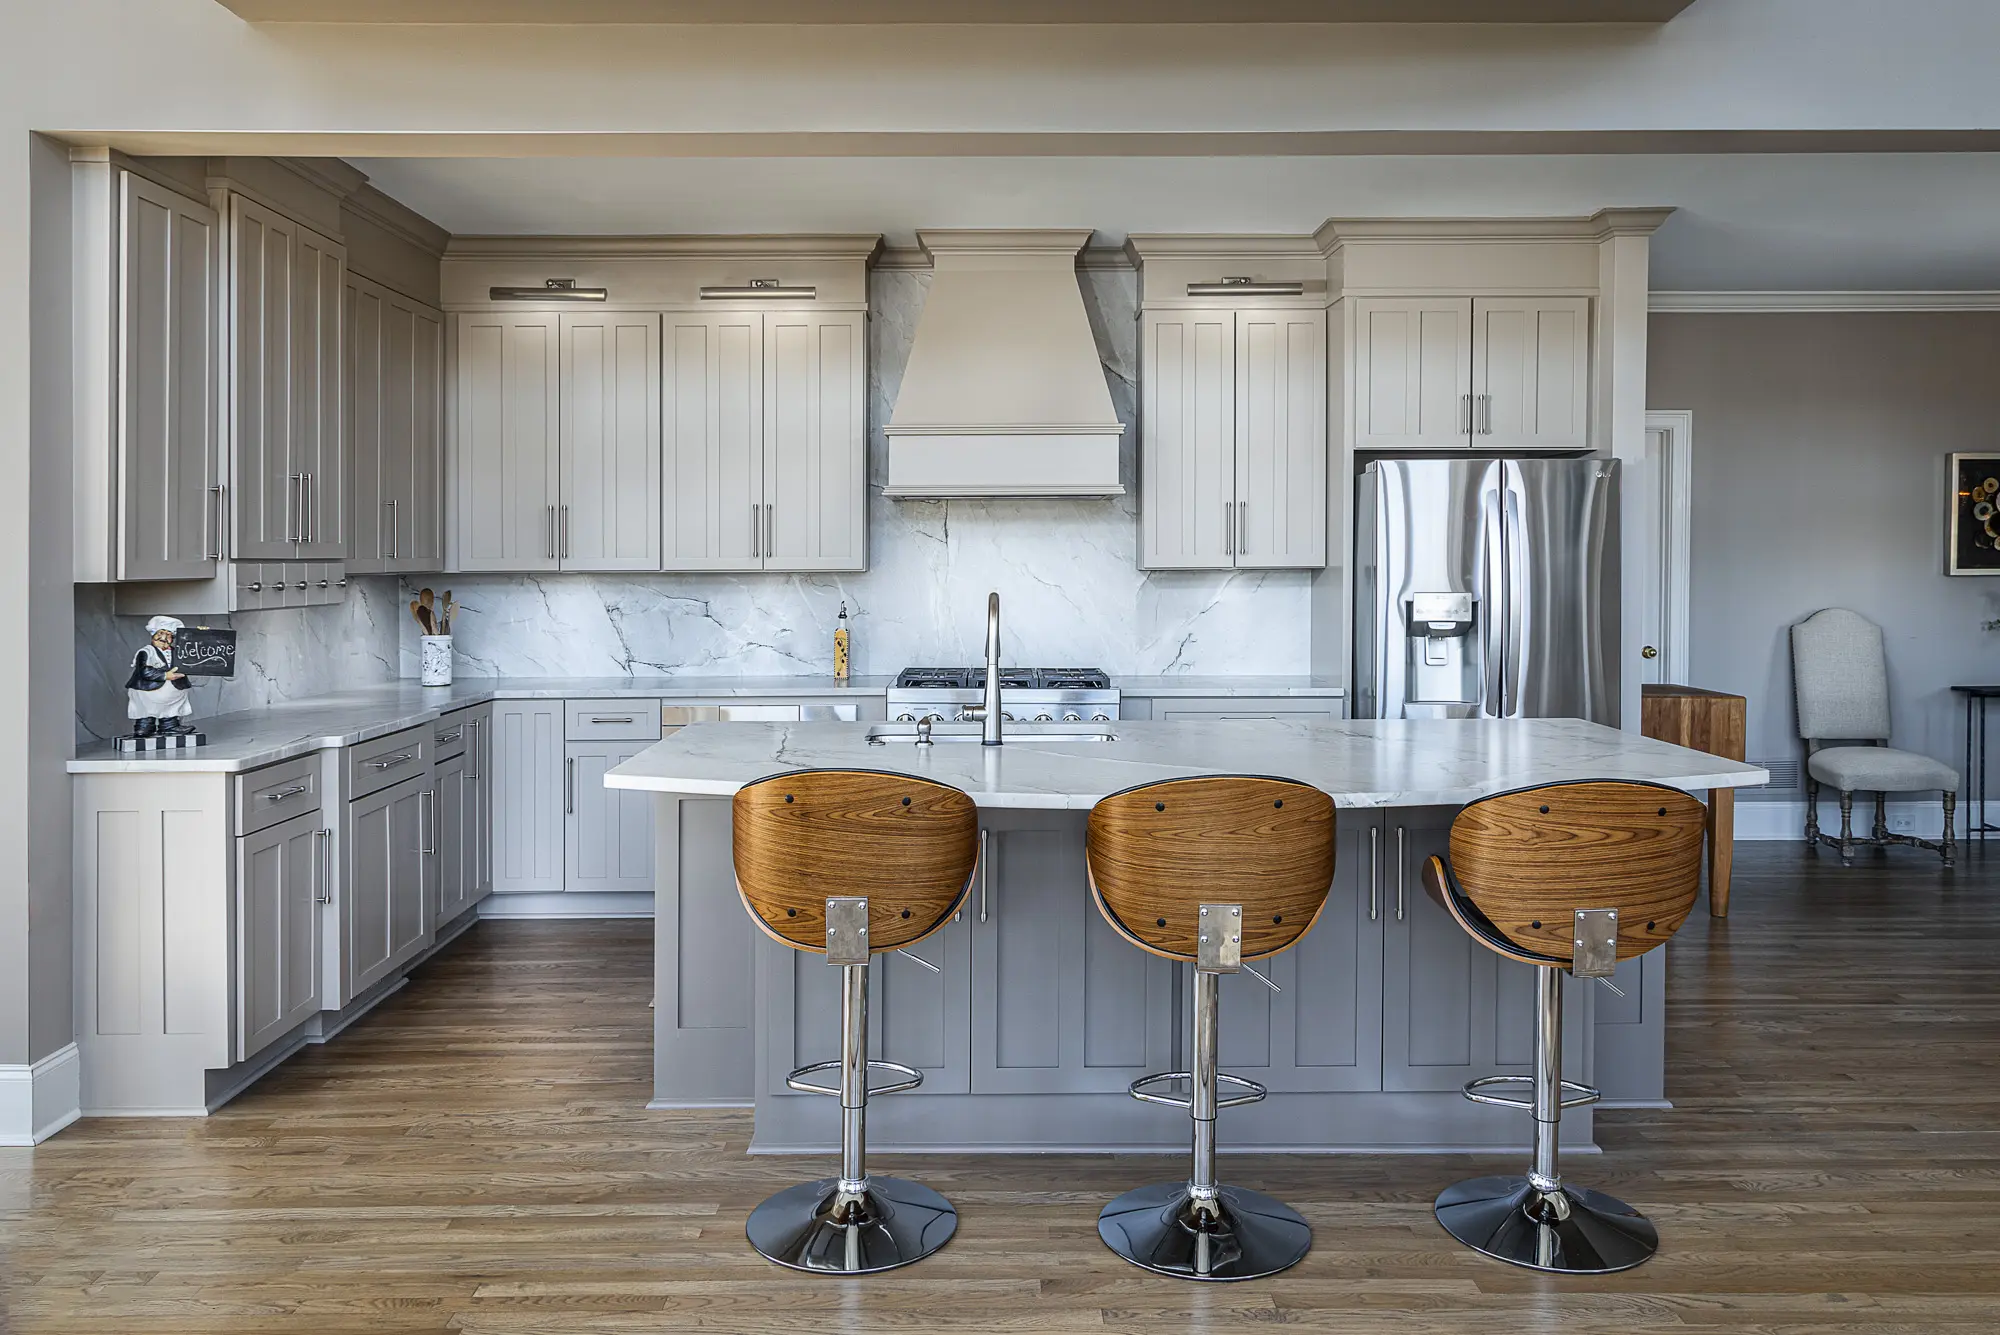 Alt text: "Sleek kitchen with taupe cabinets, marble backsplash, and contemporary wooden bar stools."